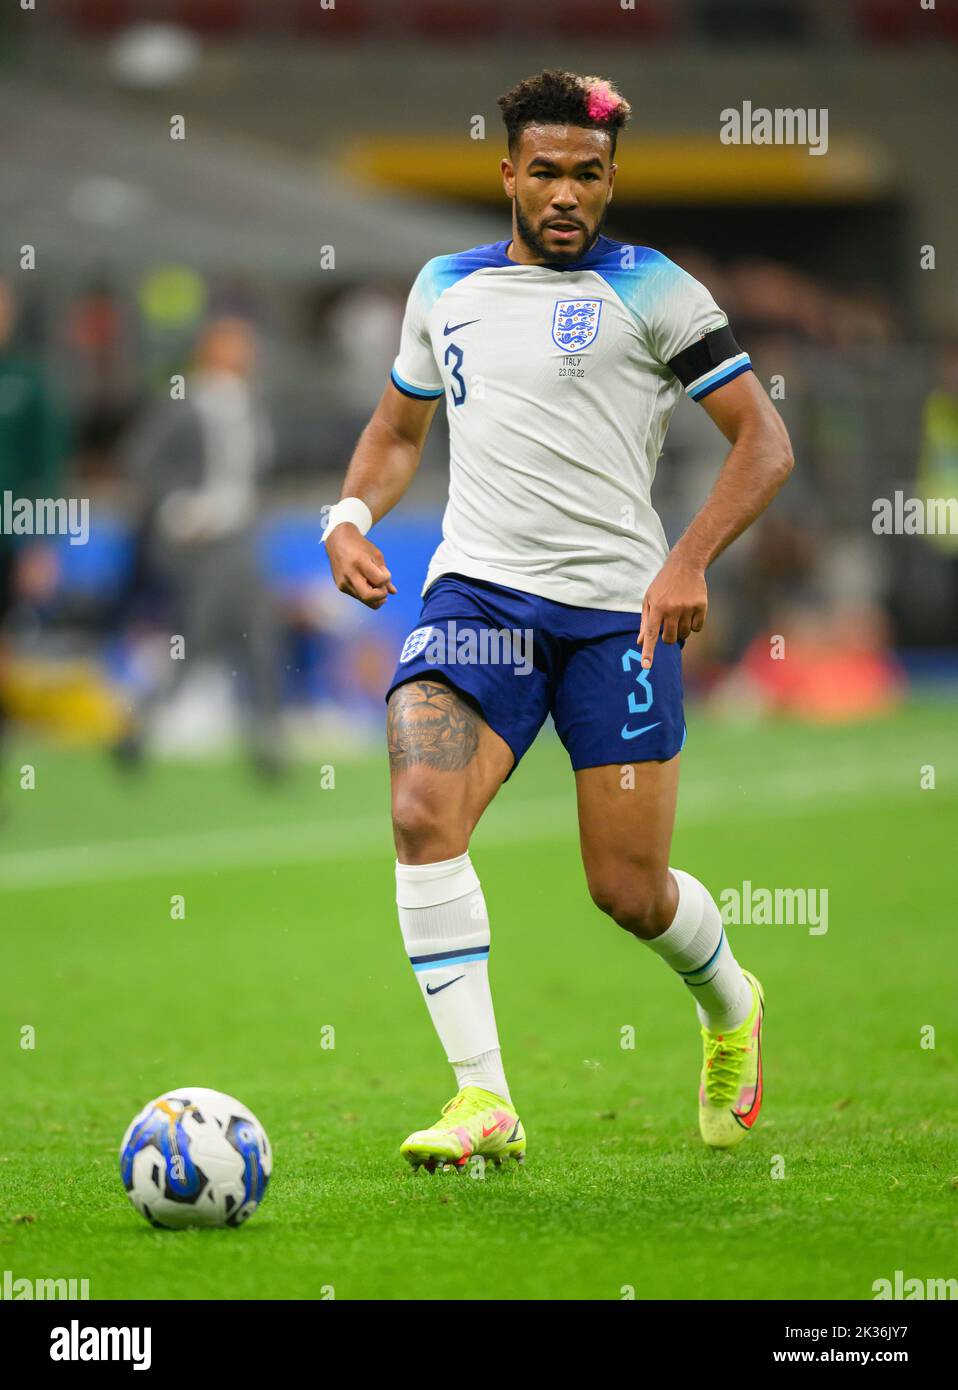 England's Reece James during the UEFA Nations League match at the San Siro, Milan, Italy Stock Photo